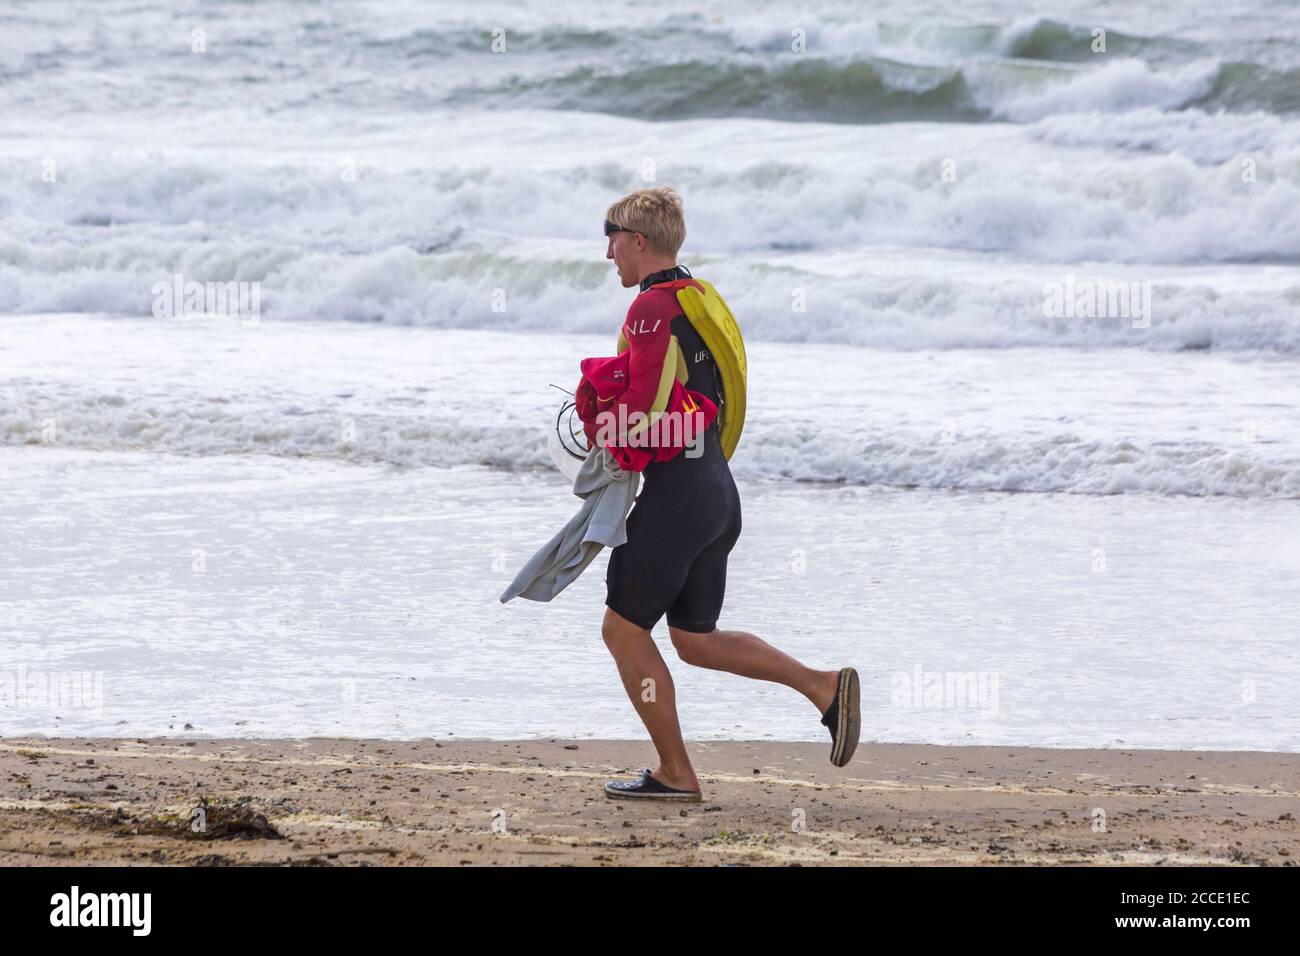 Storm Ellen brings strong wind and rough seas at Bournemouth beach, Dorset UK in August - RNLI lifeguard walking along seashore Stock Photo